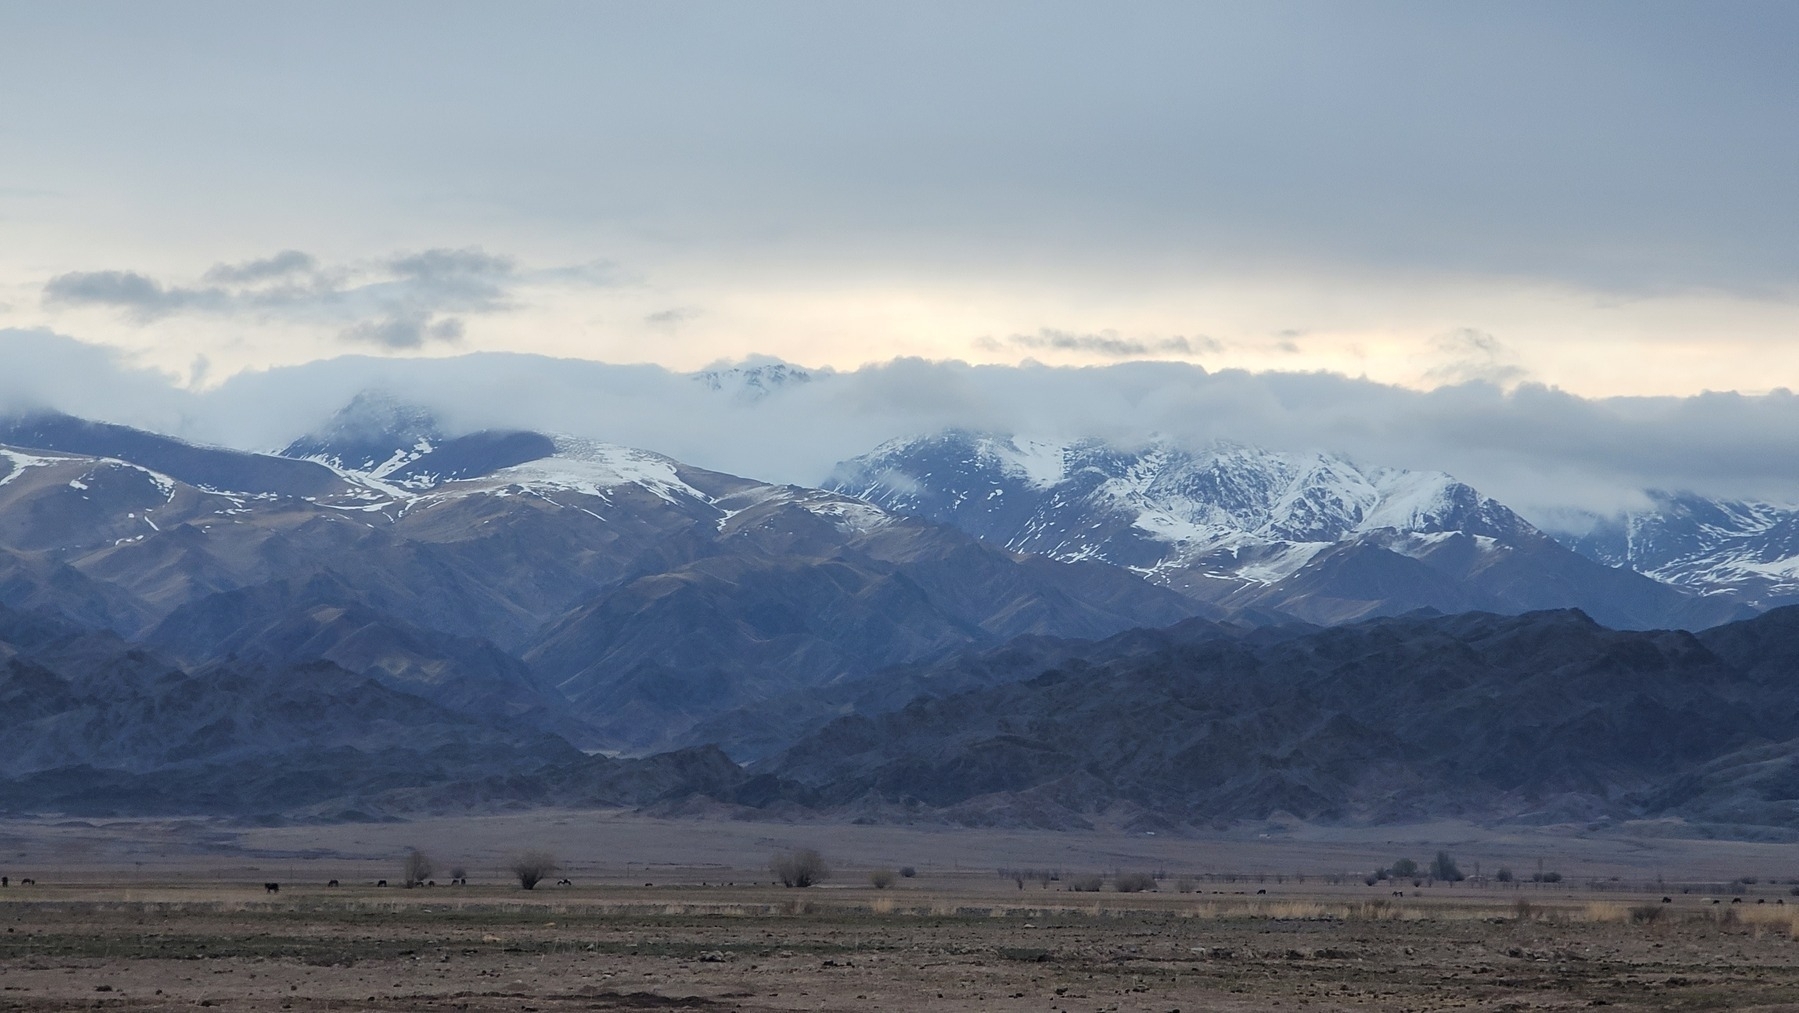 snow-capped mountains at dawn with a gray cloud separating the peaks from the sky